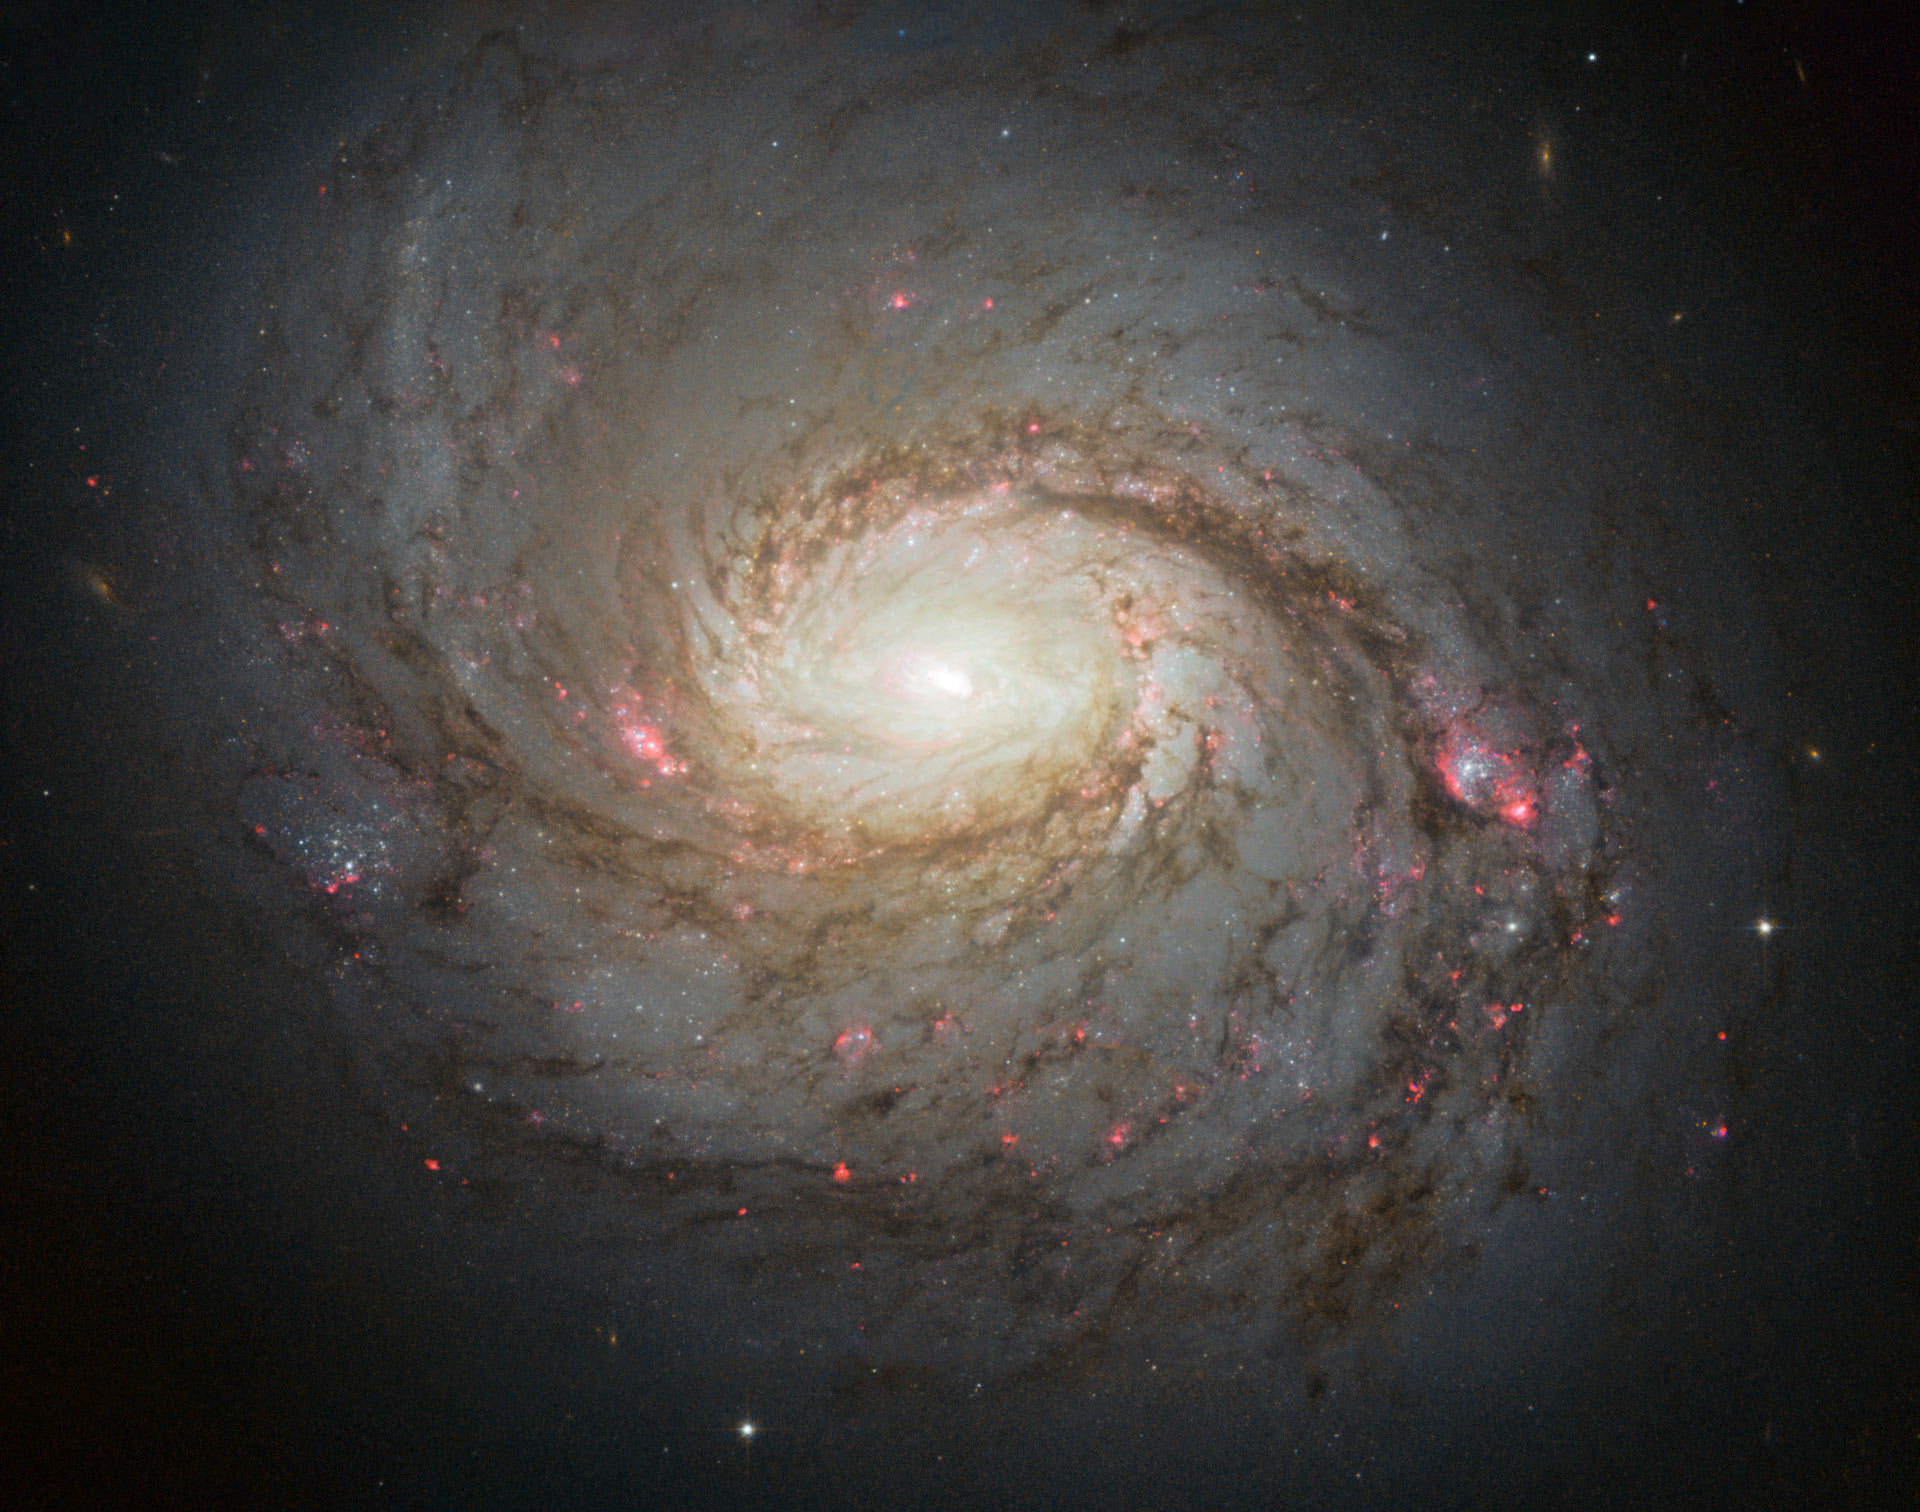 Hubble image of the spiral galaxy Messier 77, also known as NGC 1068. (Photo credit NASA/ESA/A. van Der Hoeven)